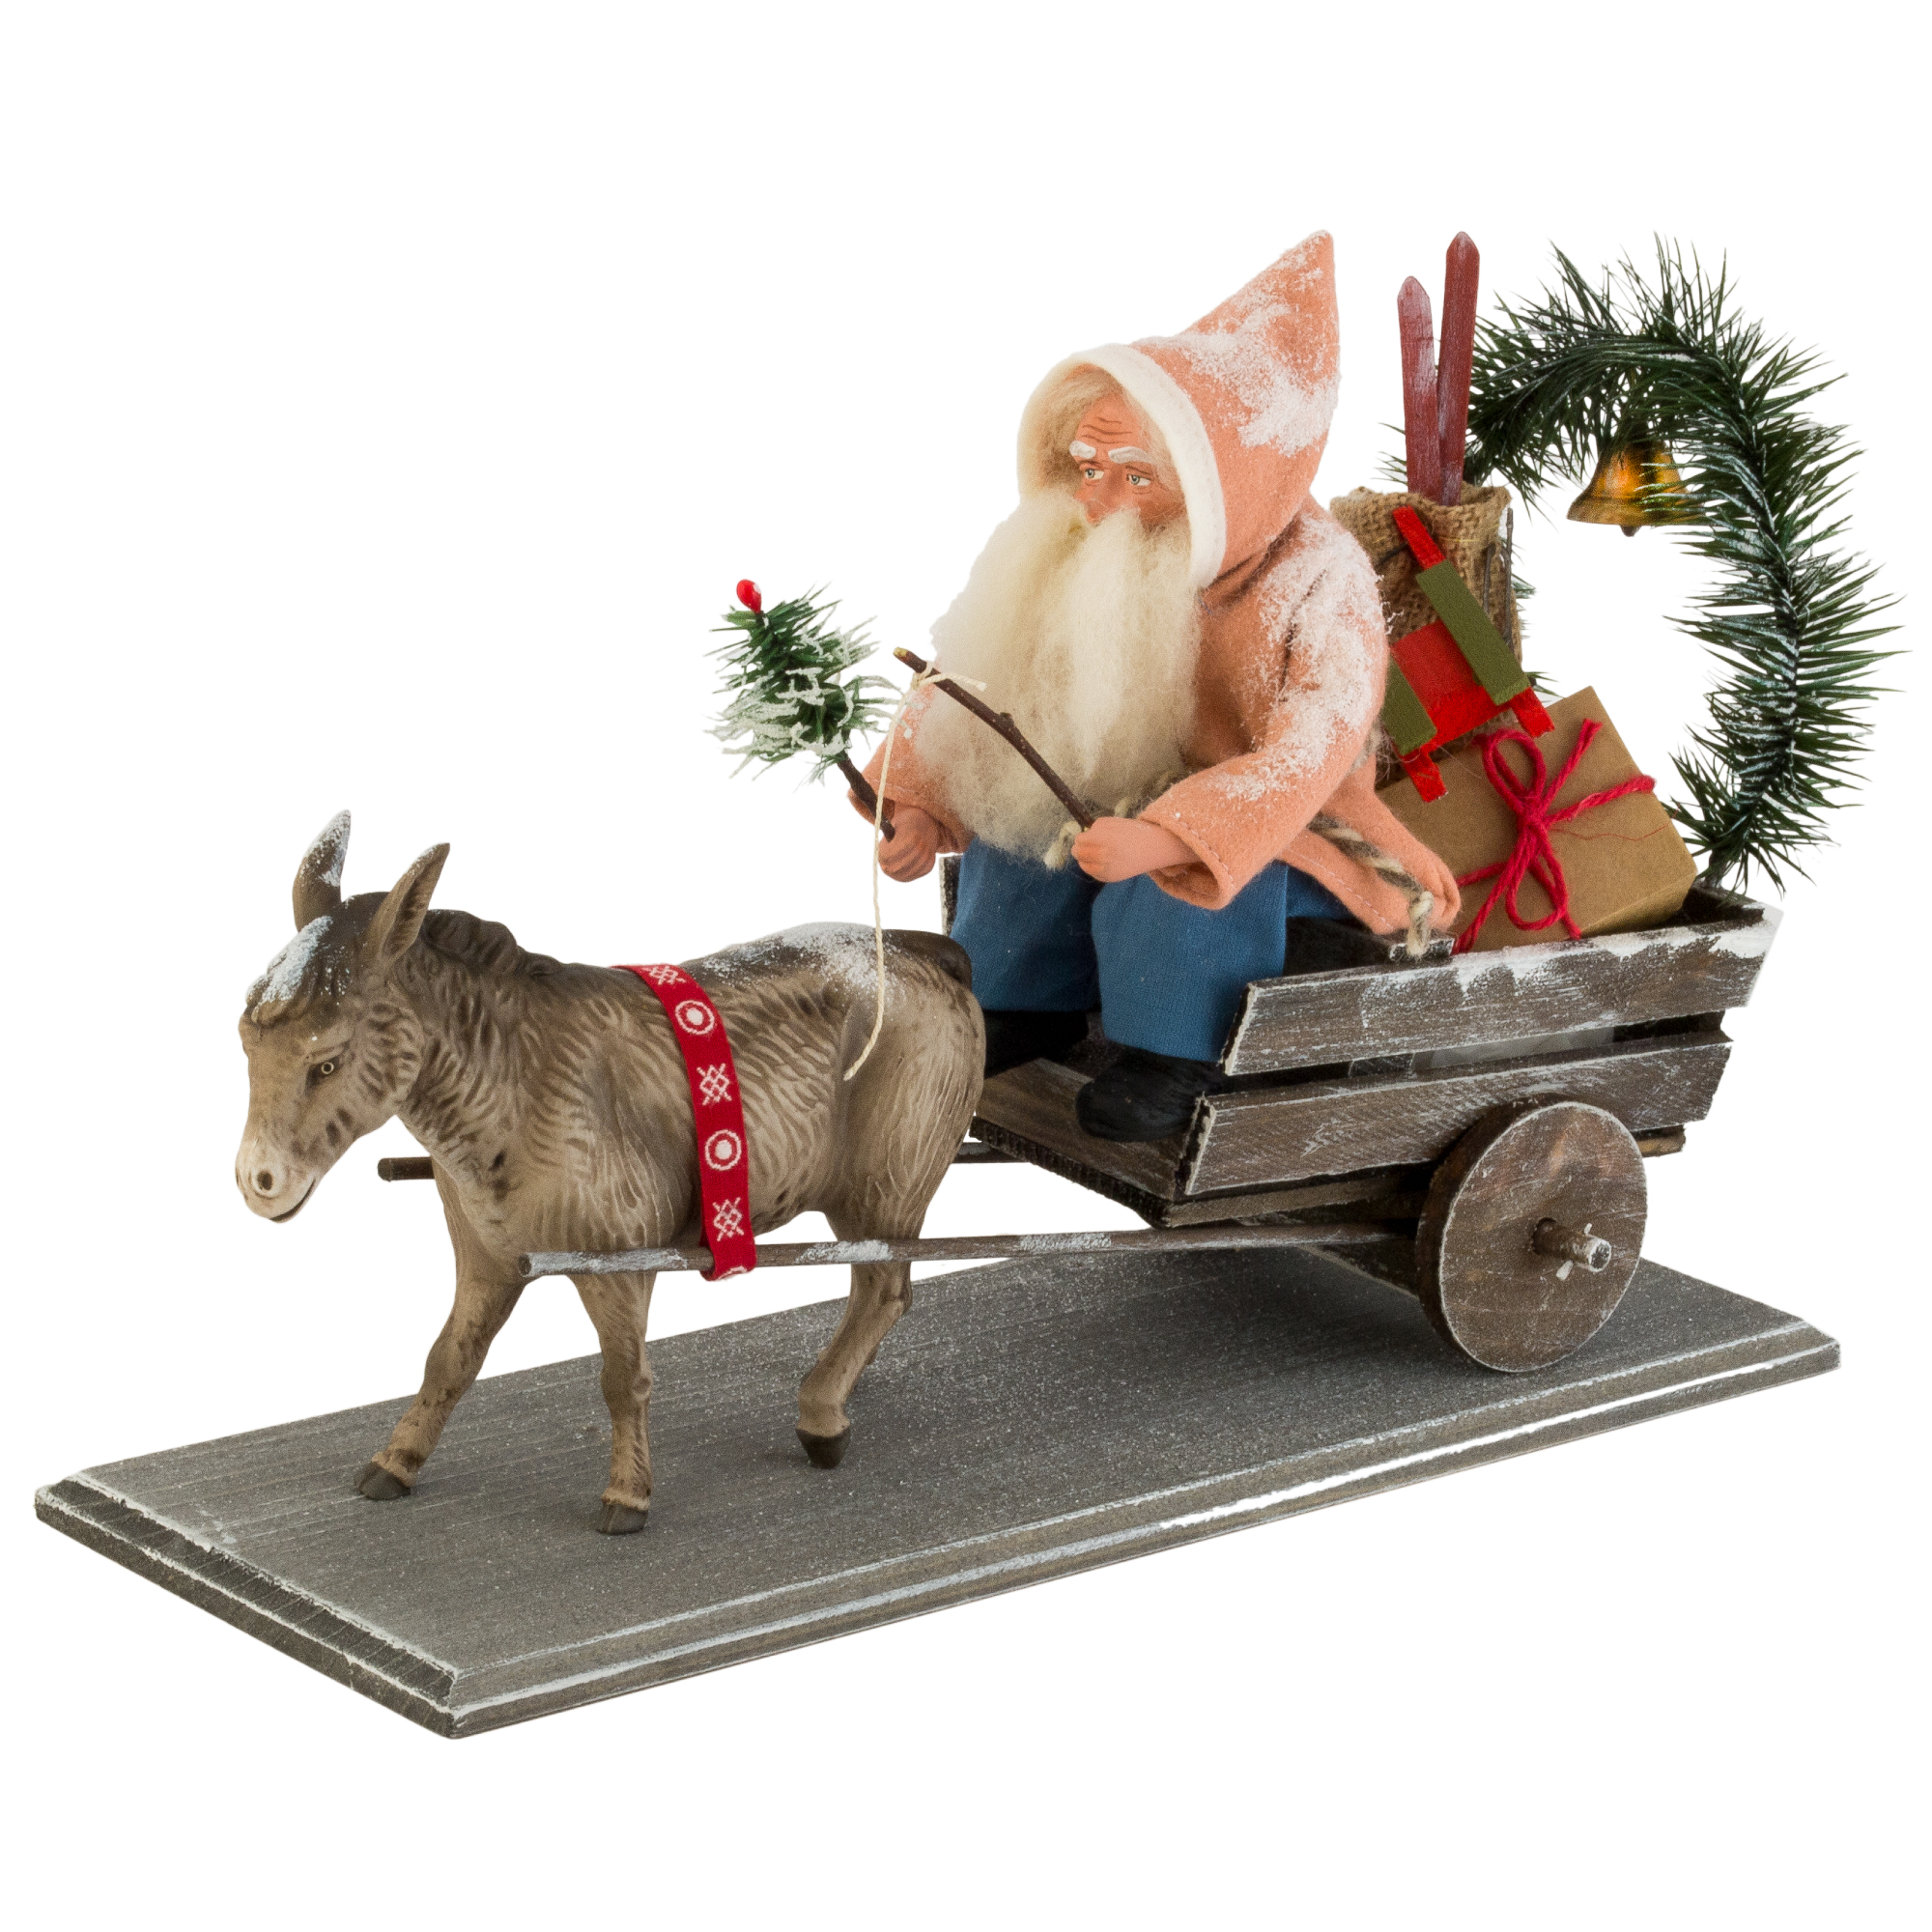 Christmas cart with donkey - Marolin Christmas decoration - made in Germany